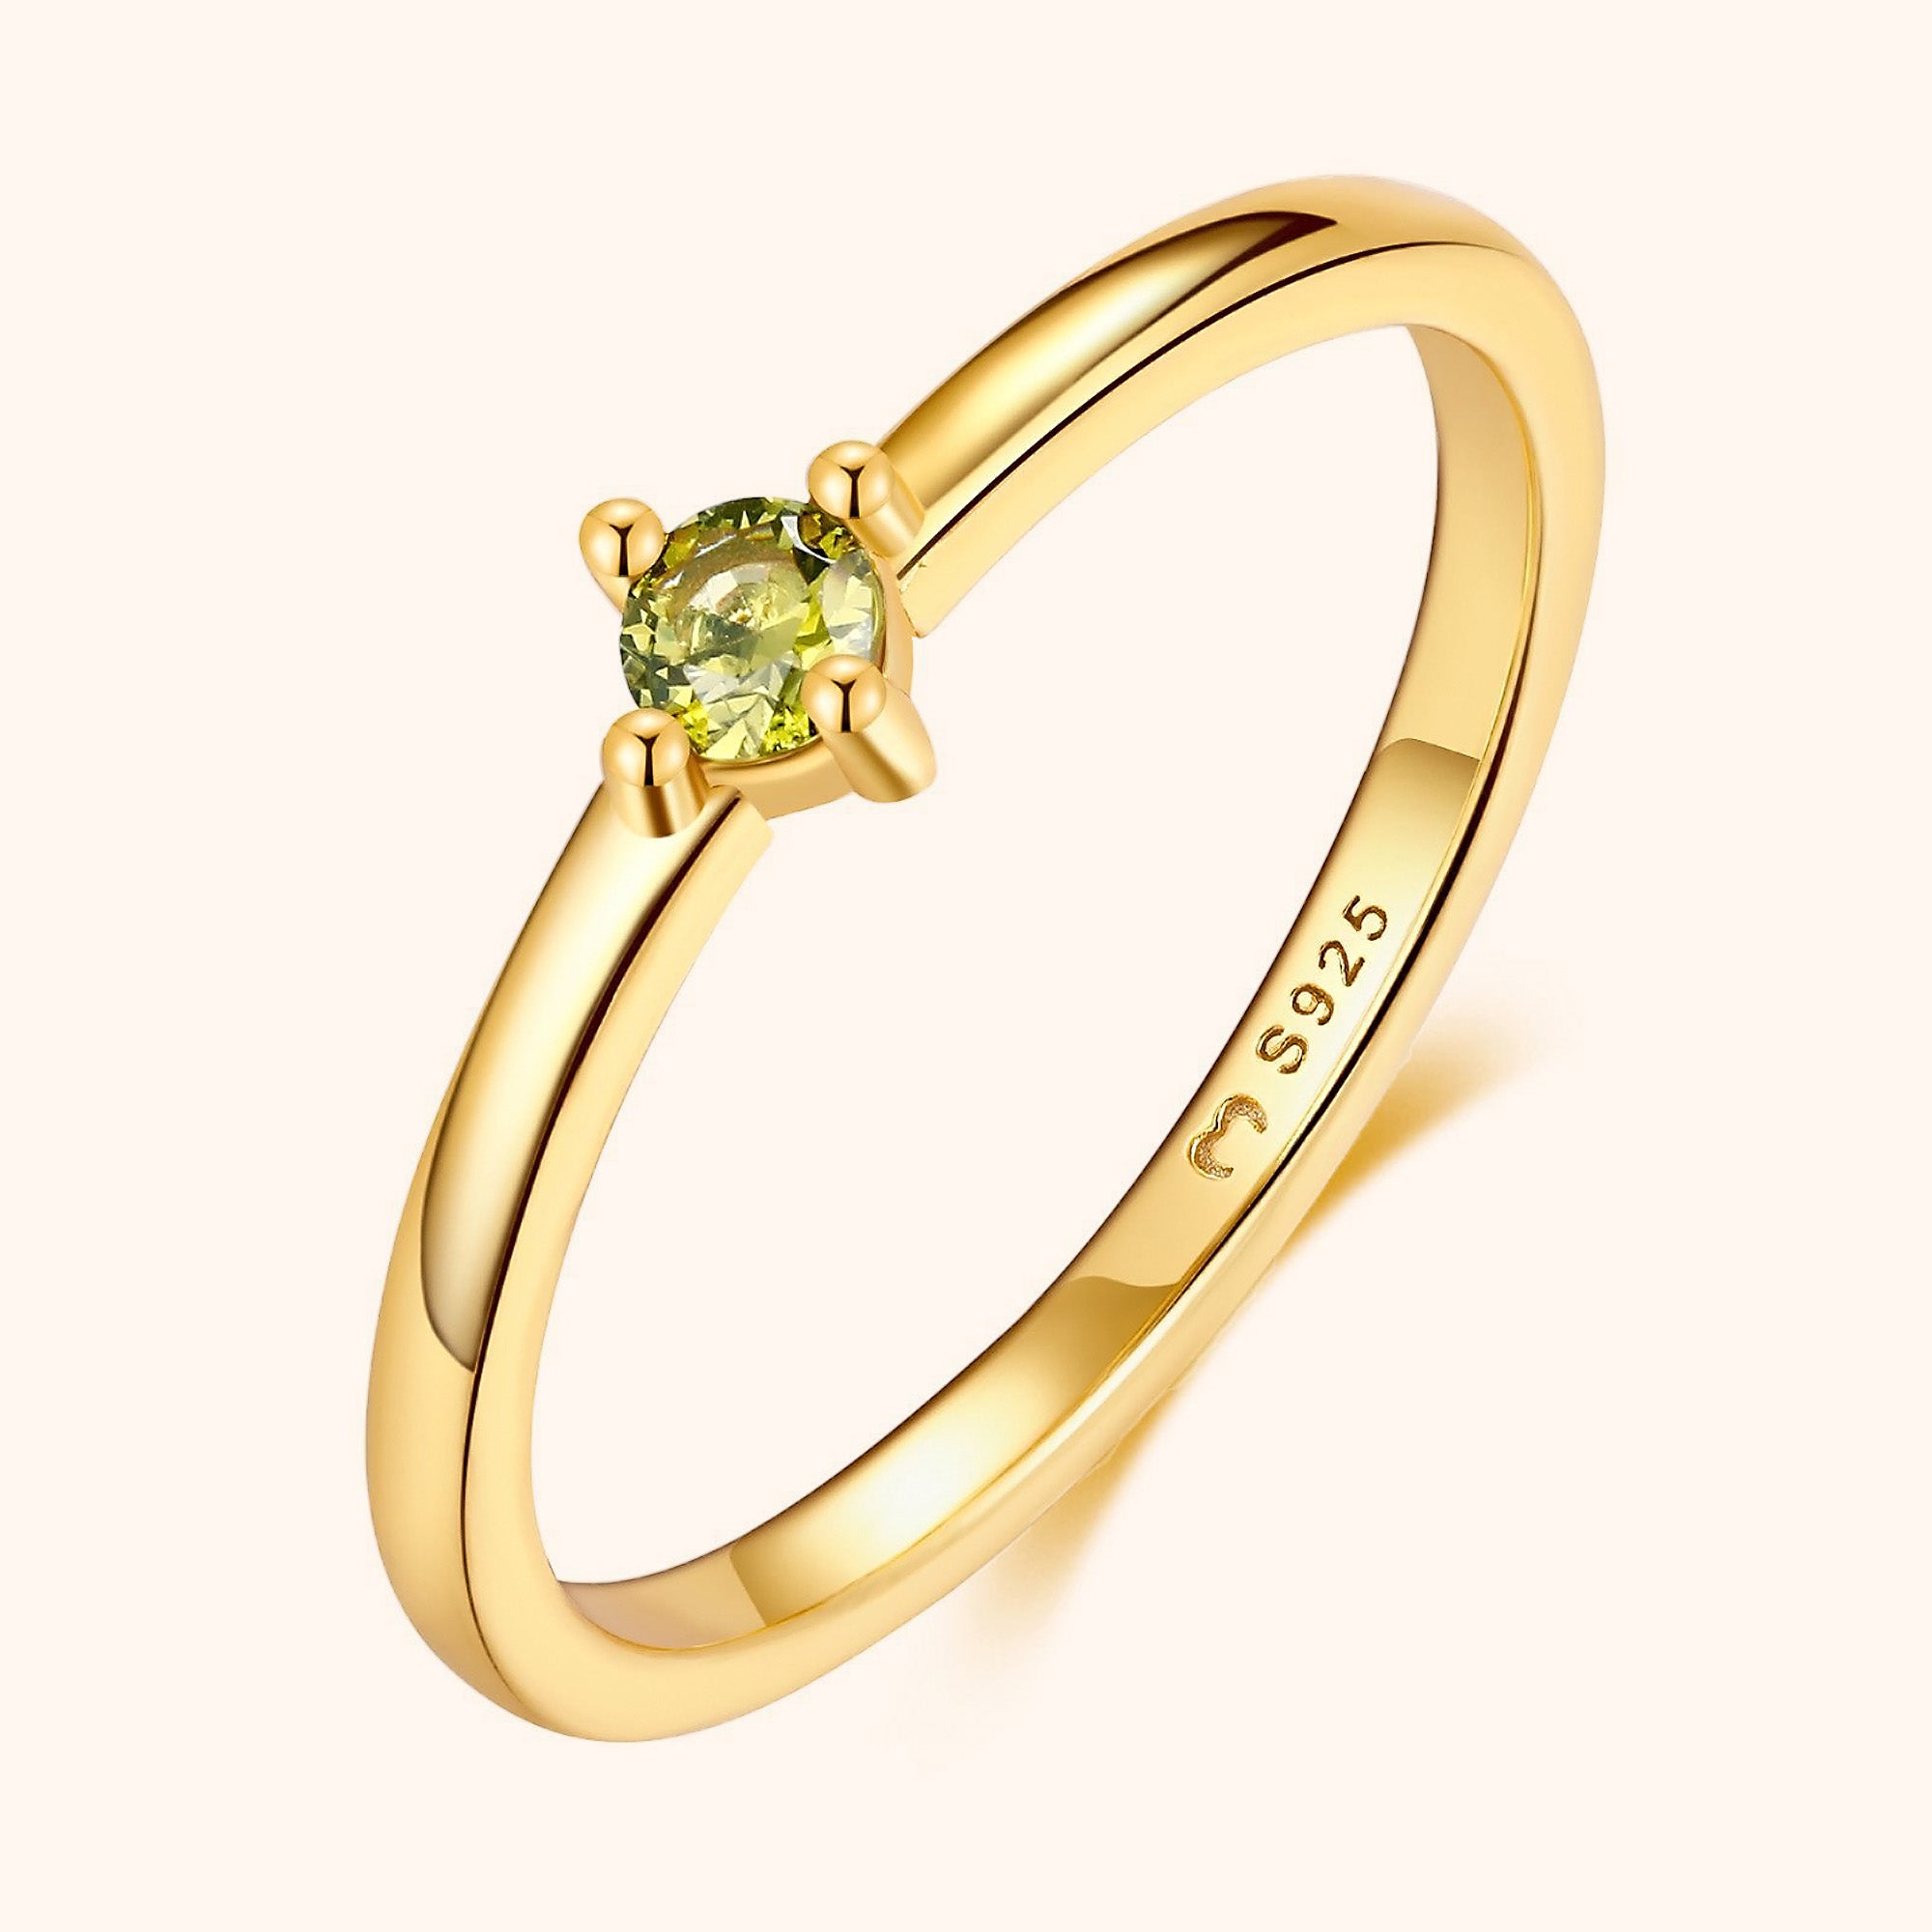 "Olive" Ring